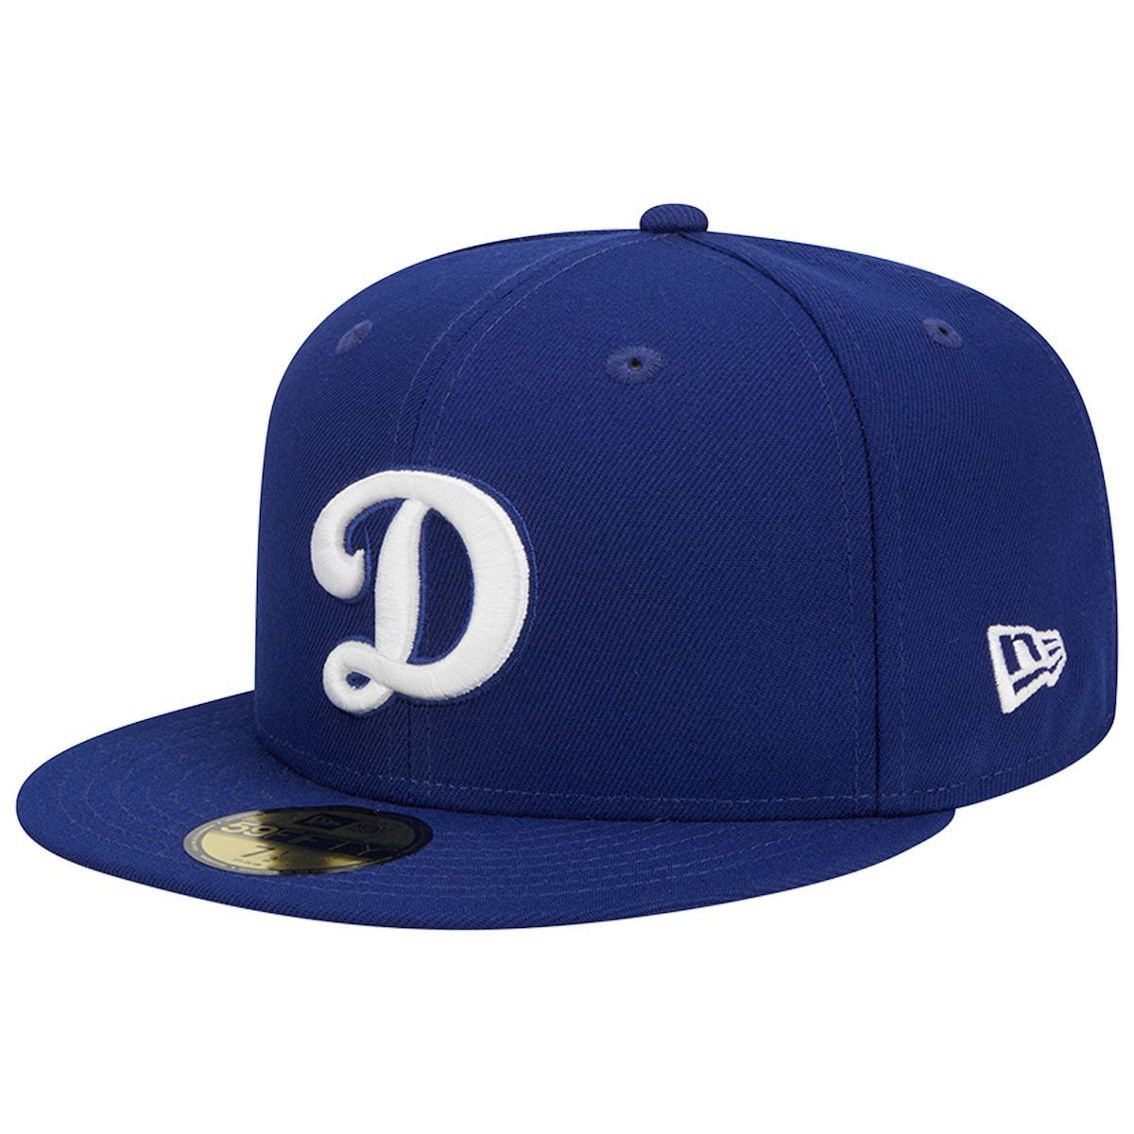 New Era Men's Royal Los Angeles Dodgers Alternate Logo 2020 World Series Team Color 59FIFTY Fitted Hat - Image 4 of 4